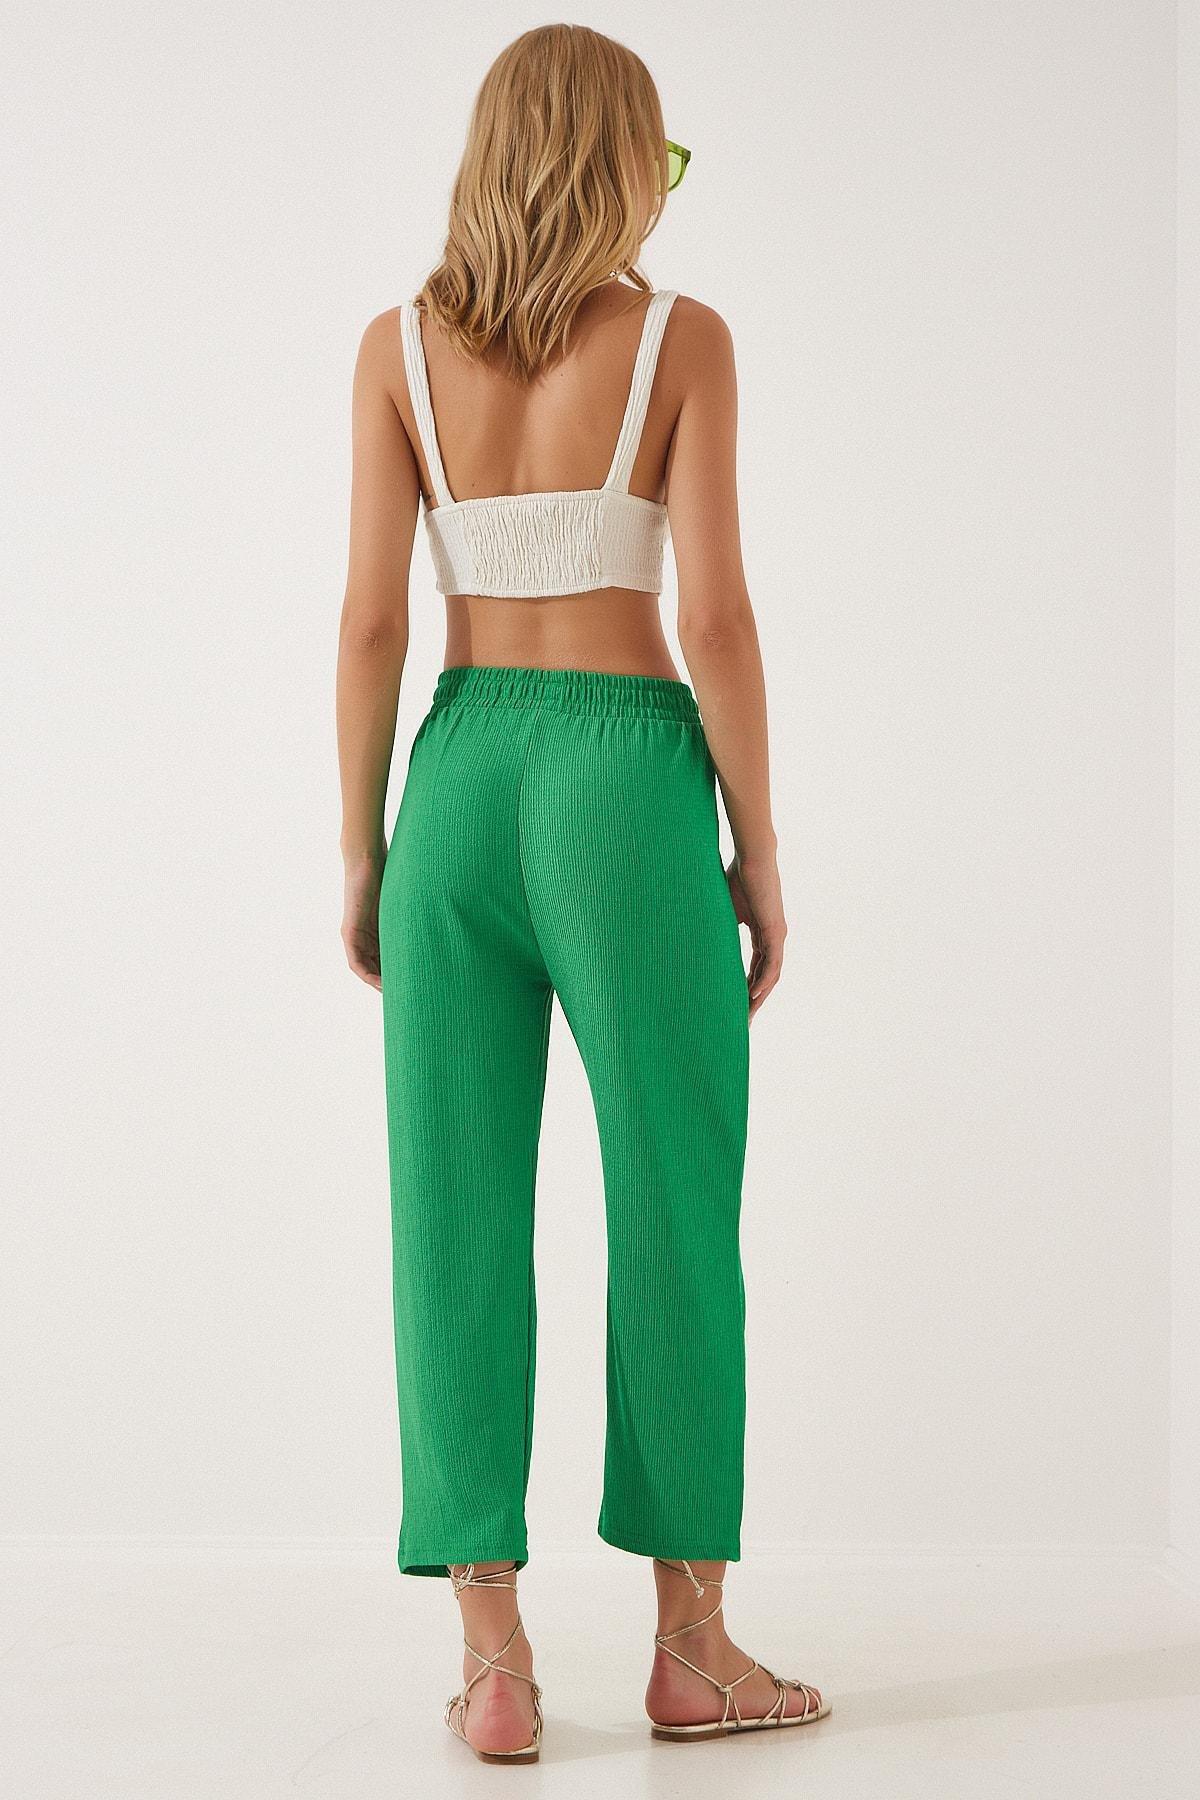 Happiness Istanbul - Green V-Neck Co Ord Set